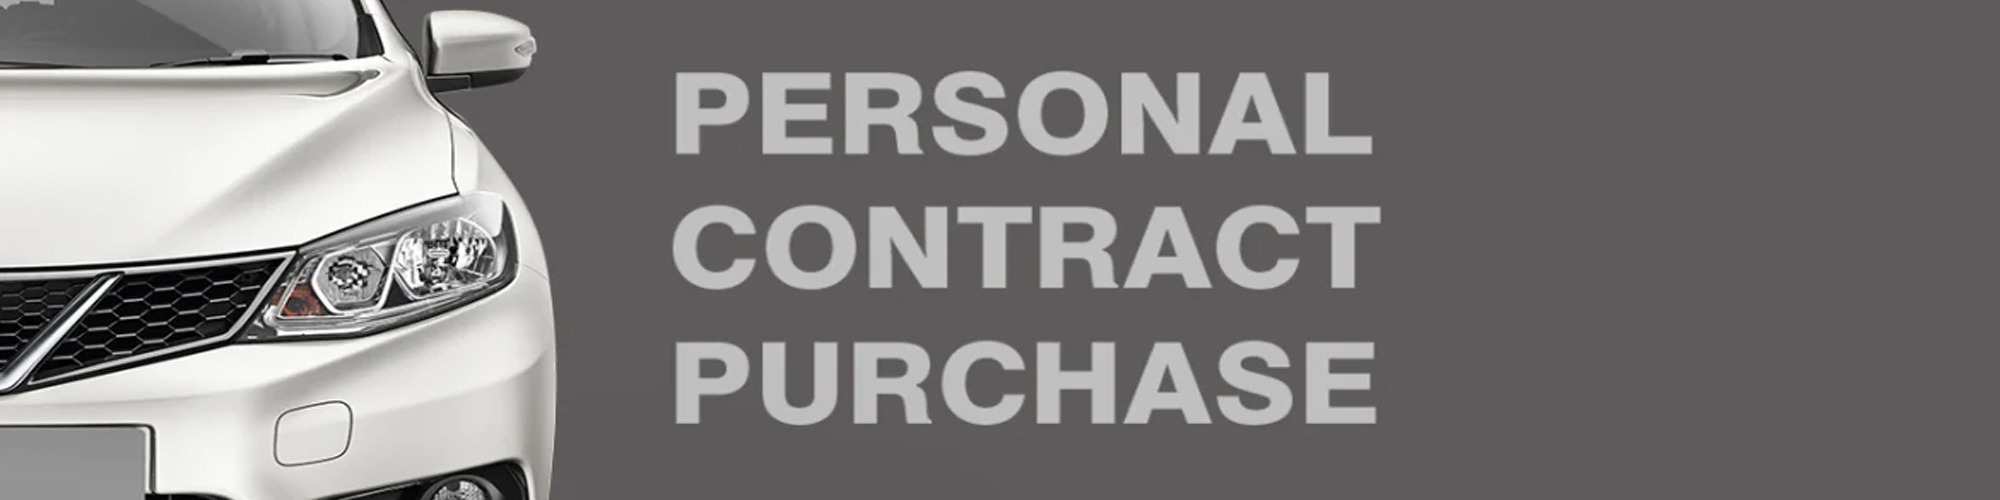 Personal Contract Purchase - PCP